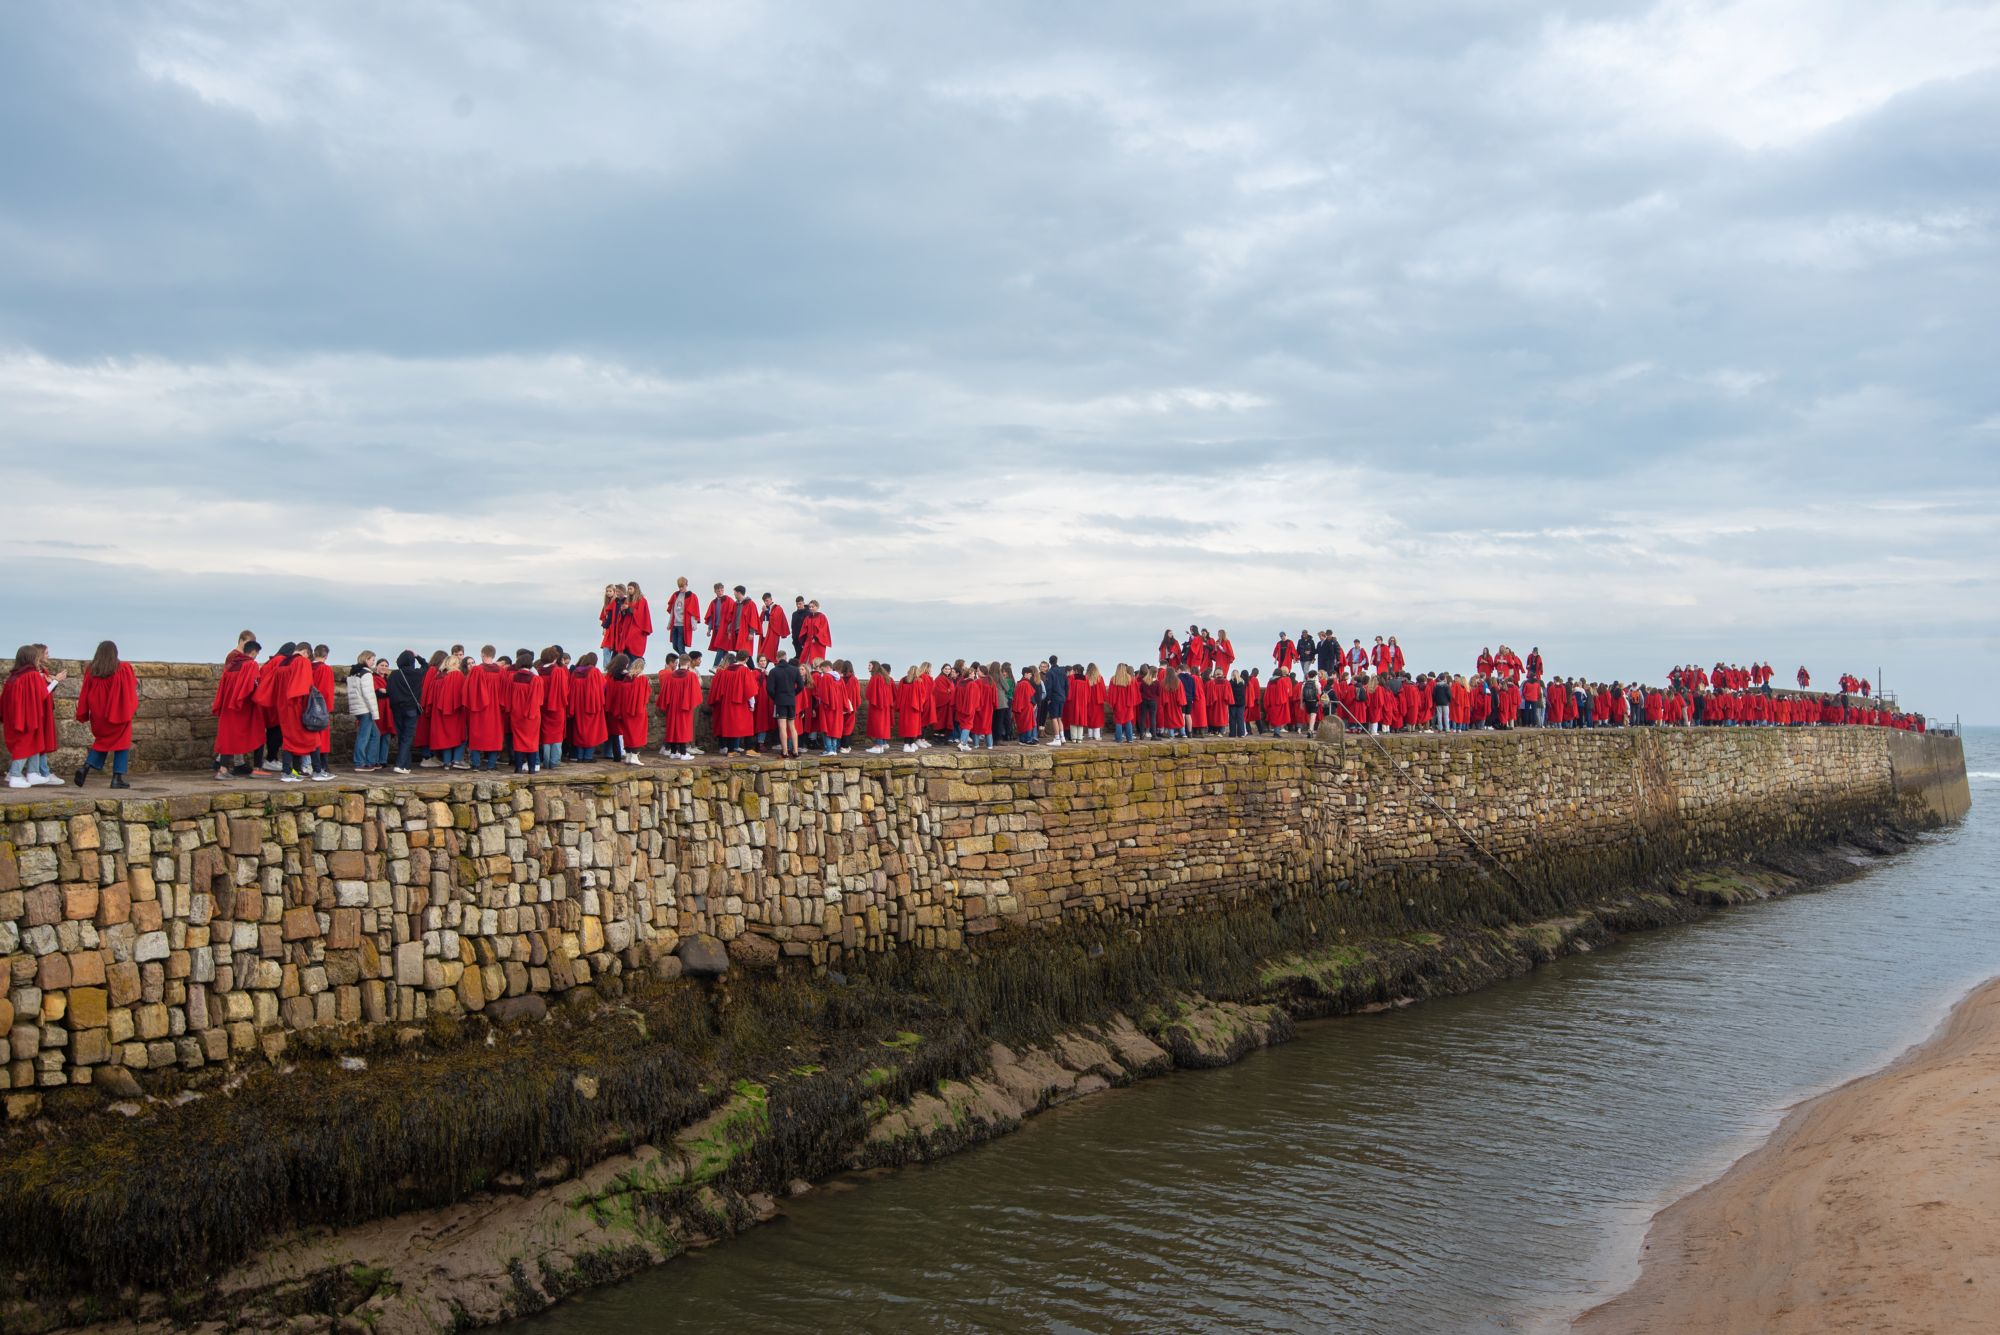 Students walking along the pier in their red gowns.